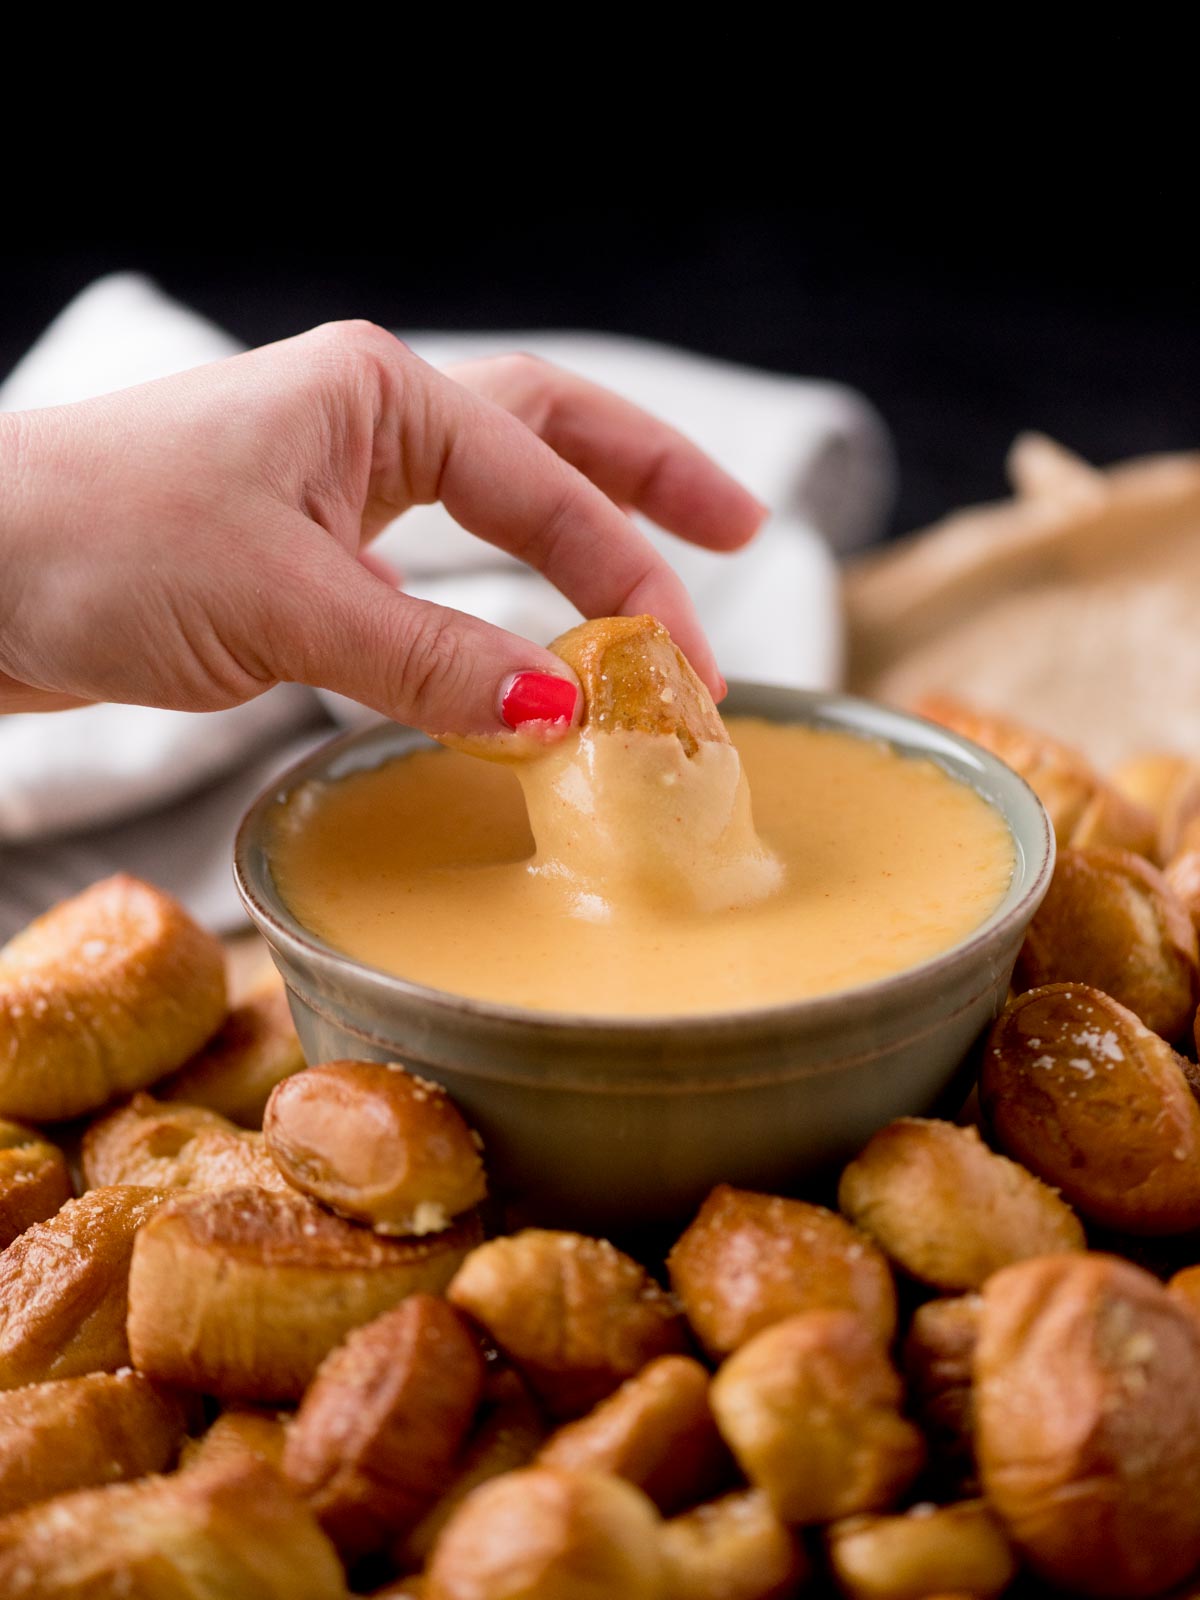 pretzel bites being dipped into beer cheese dip in a bowl. It is surrounded by pretzel bites on parchment paper